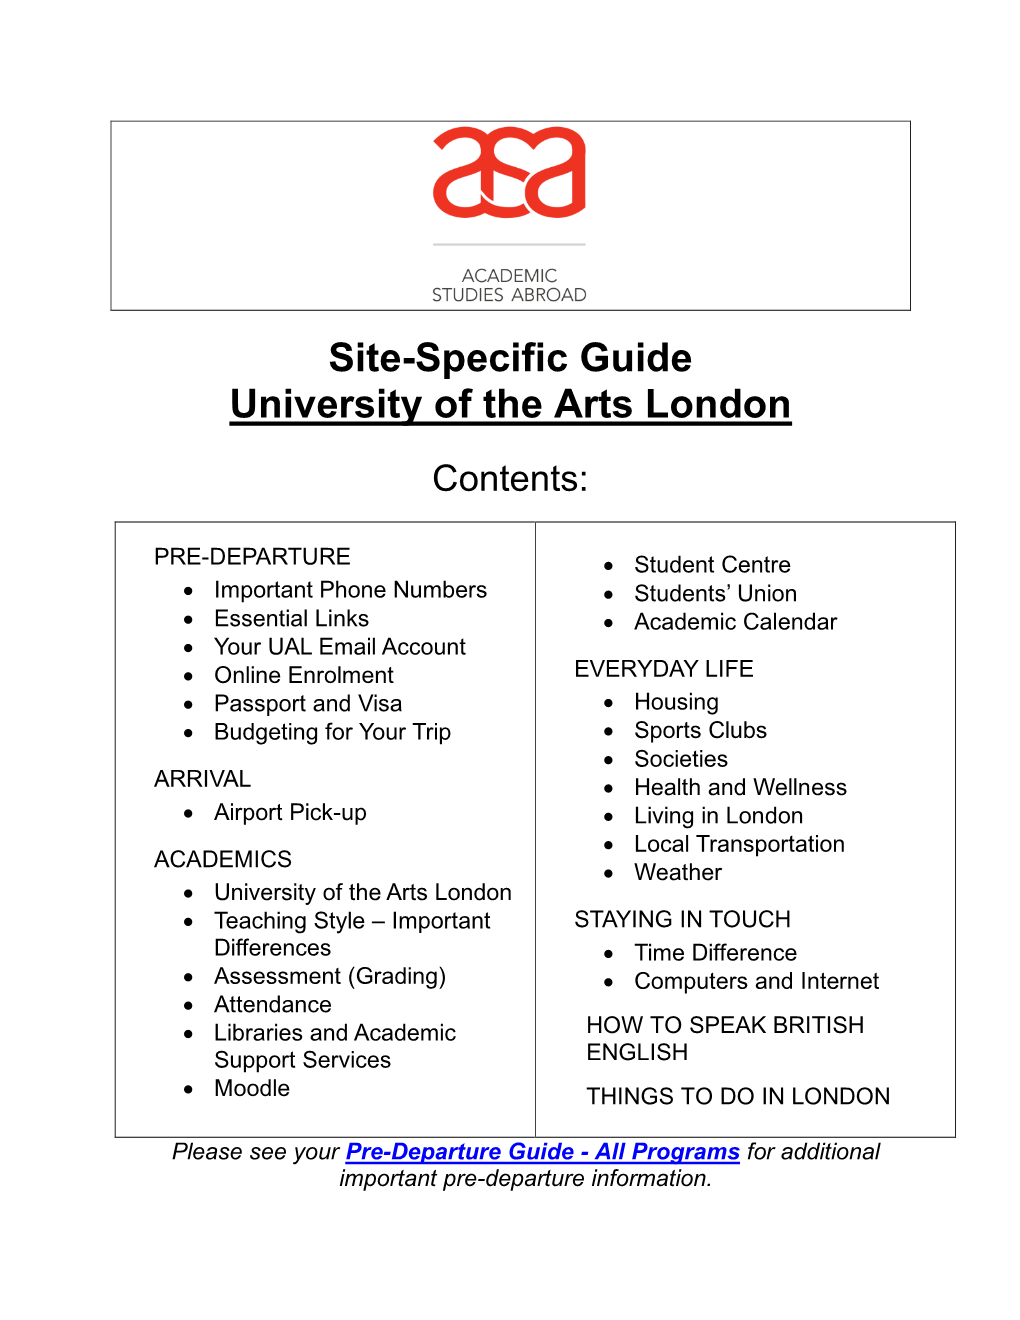 Site-Specific Guide University of the Arts London